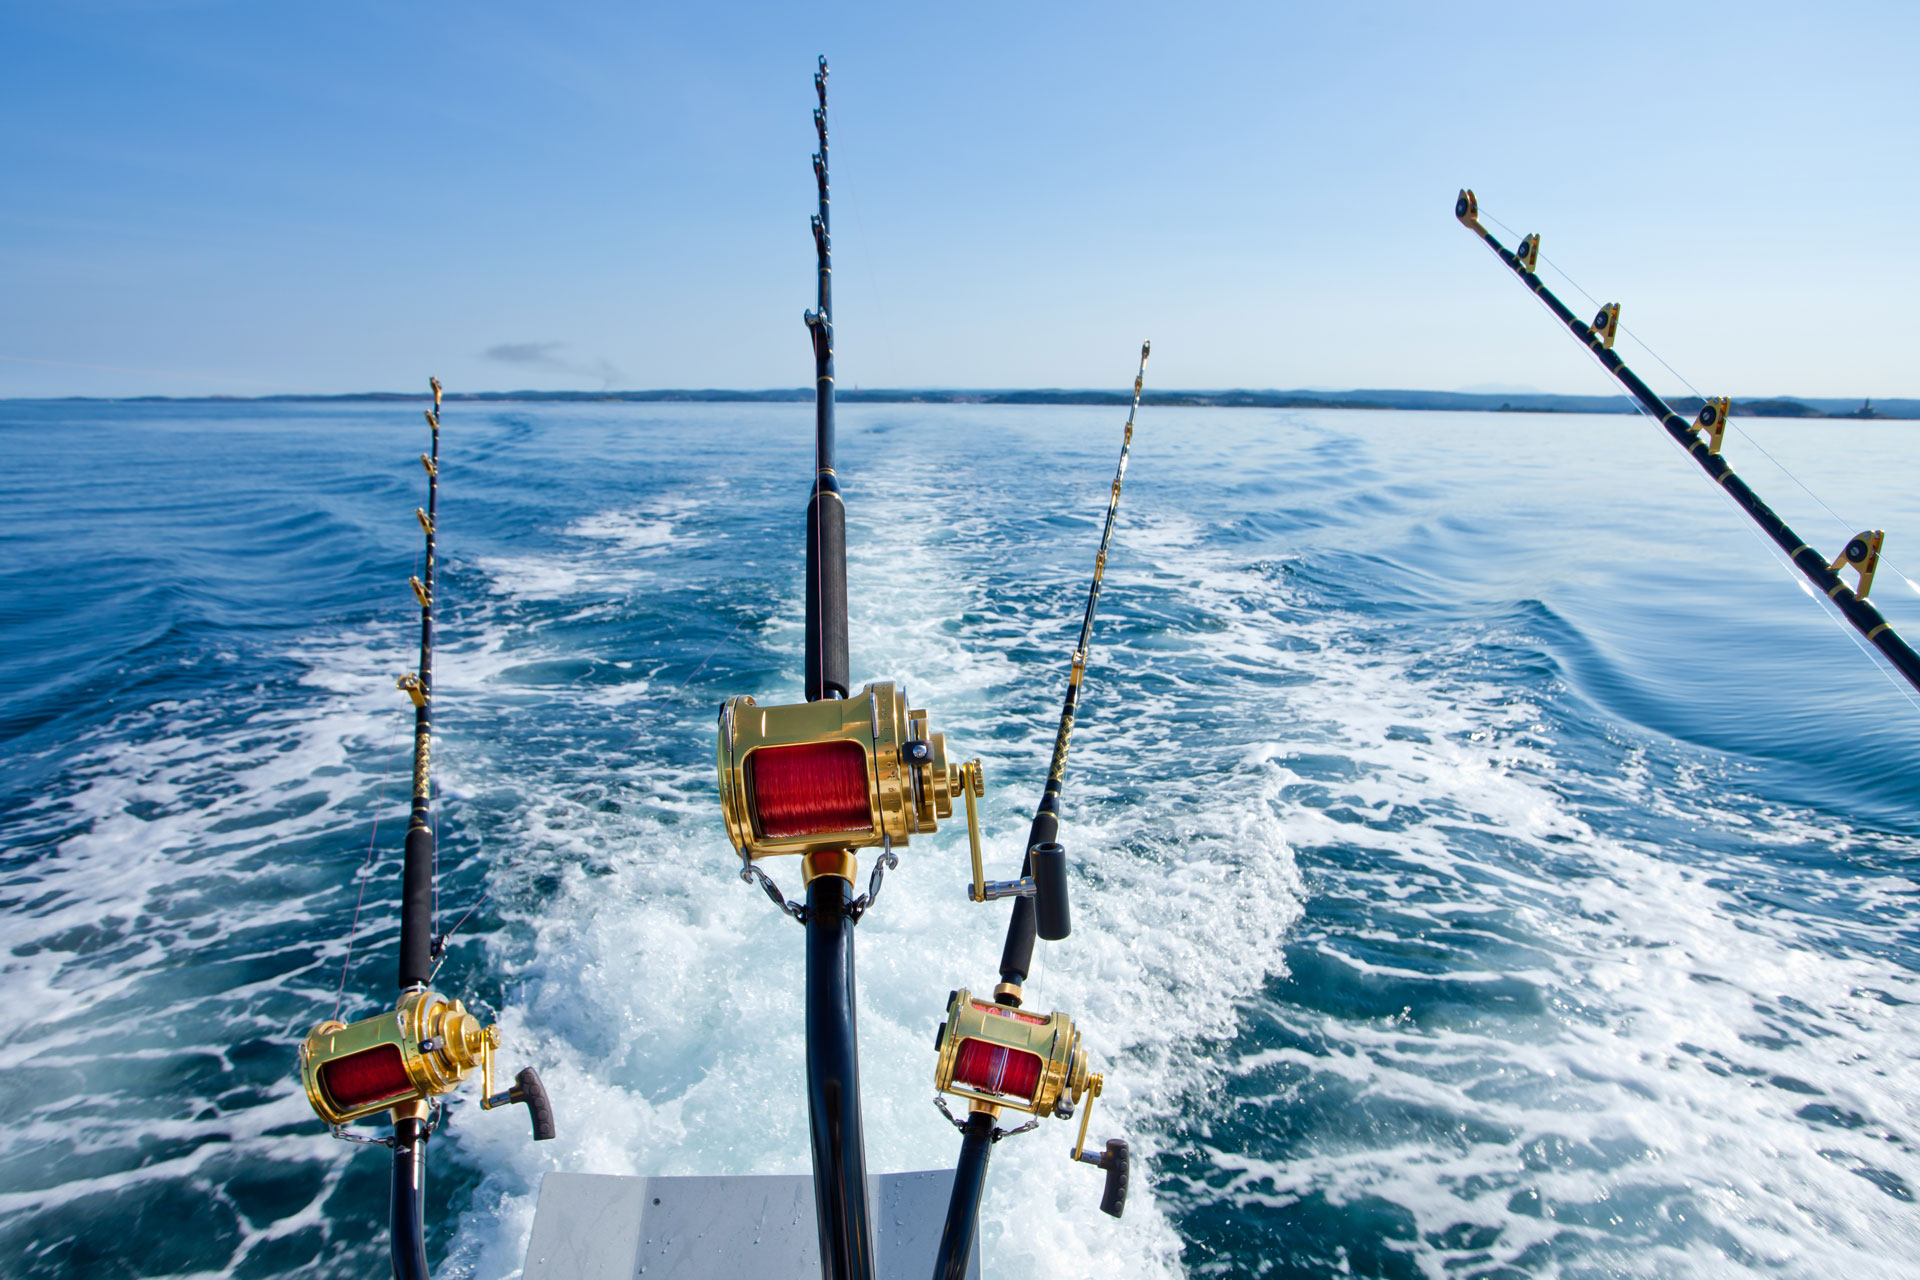 Fishing charter excursions and cruises are lovely and unique gifts